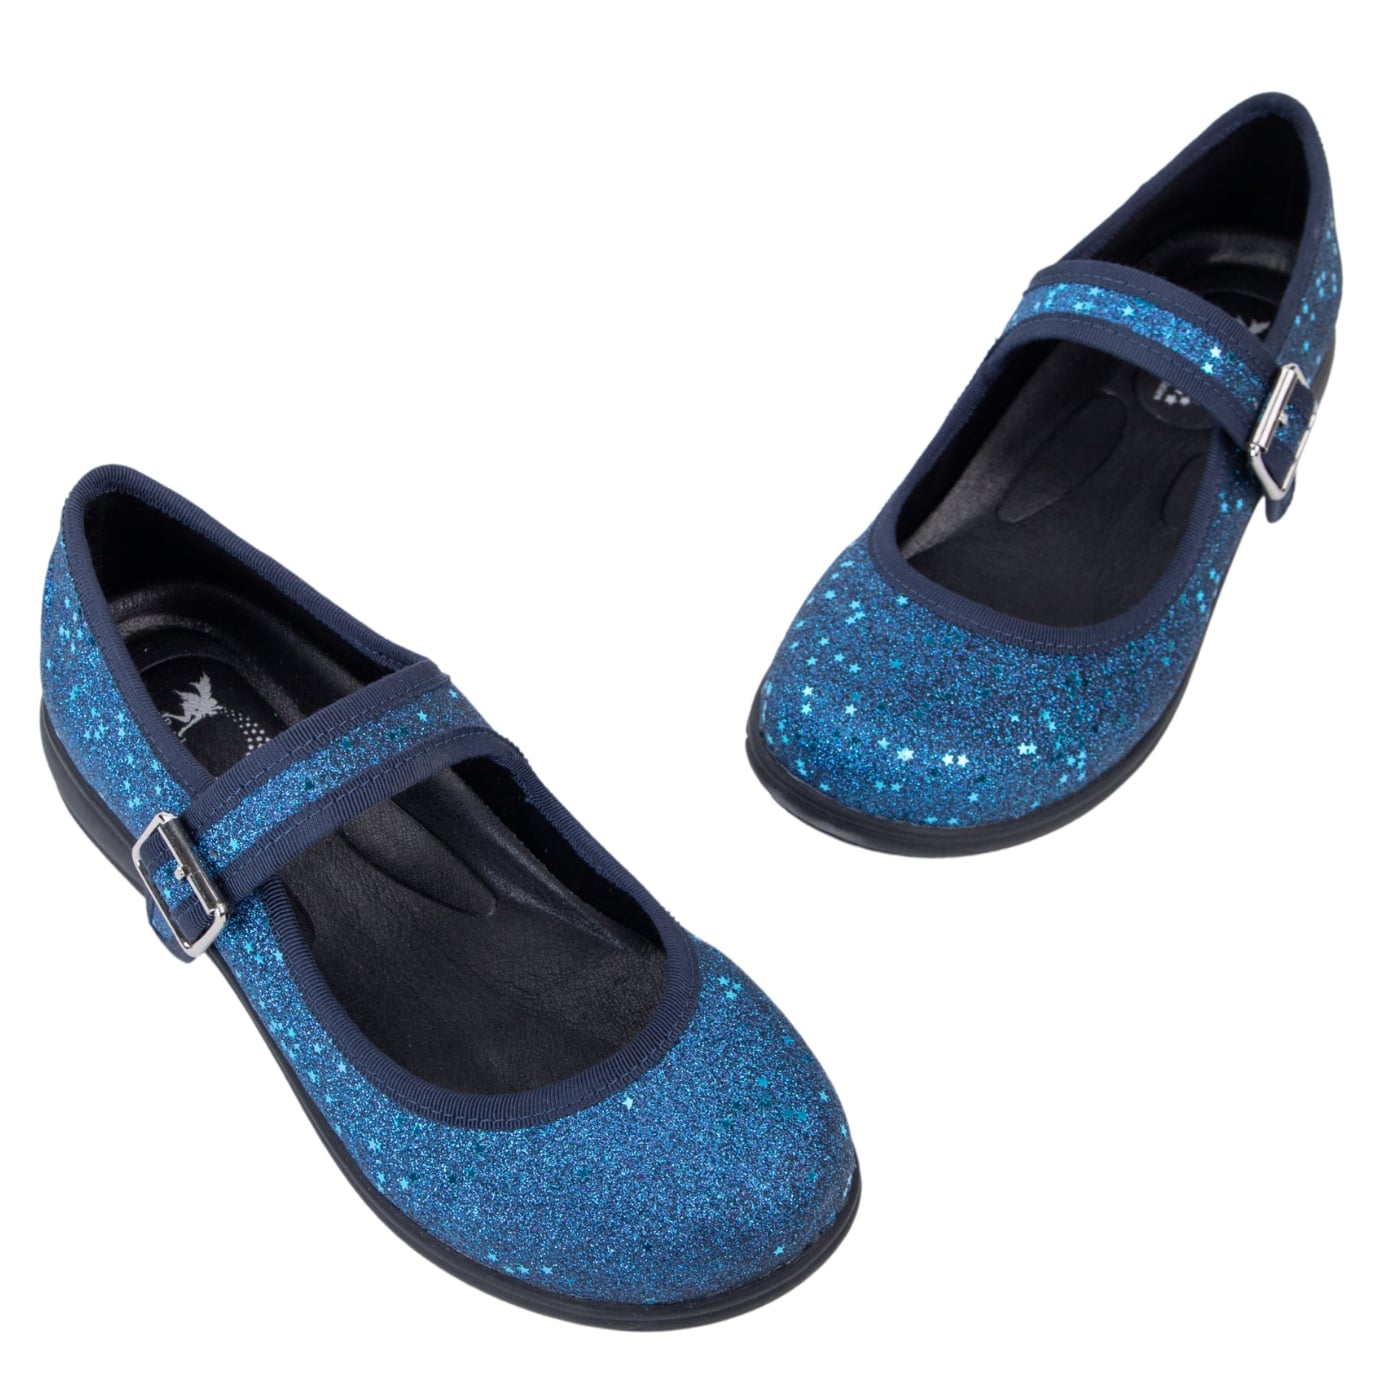 Sapphire Mary Janes by RainbowsAndFairies.com (Blue Glitter - Stars - Sparkle Shoes - Mary Janes - Buckle Up Shoes - Mismatched Shoes) - SKU: FW_MARYJ_SAPPH_ORG - Pic 01